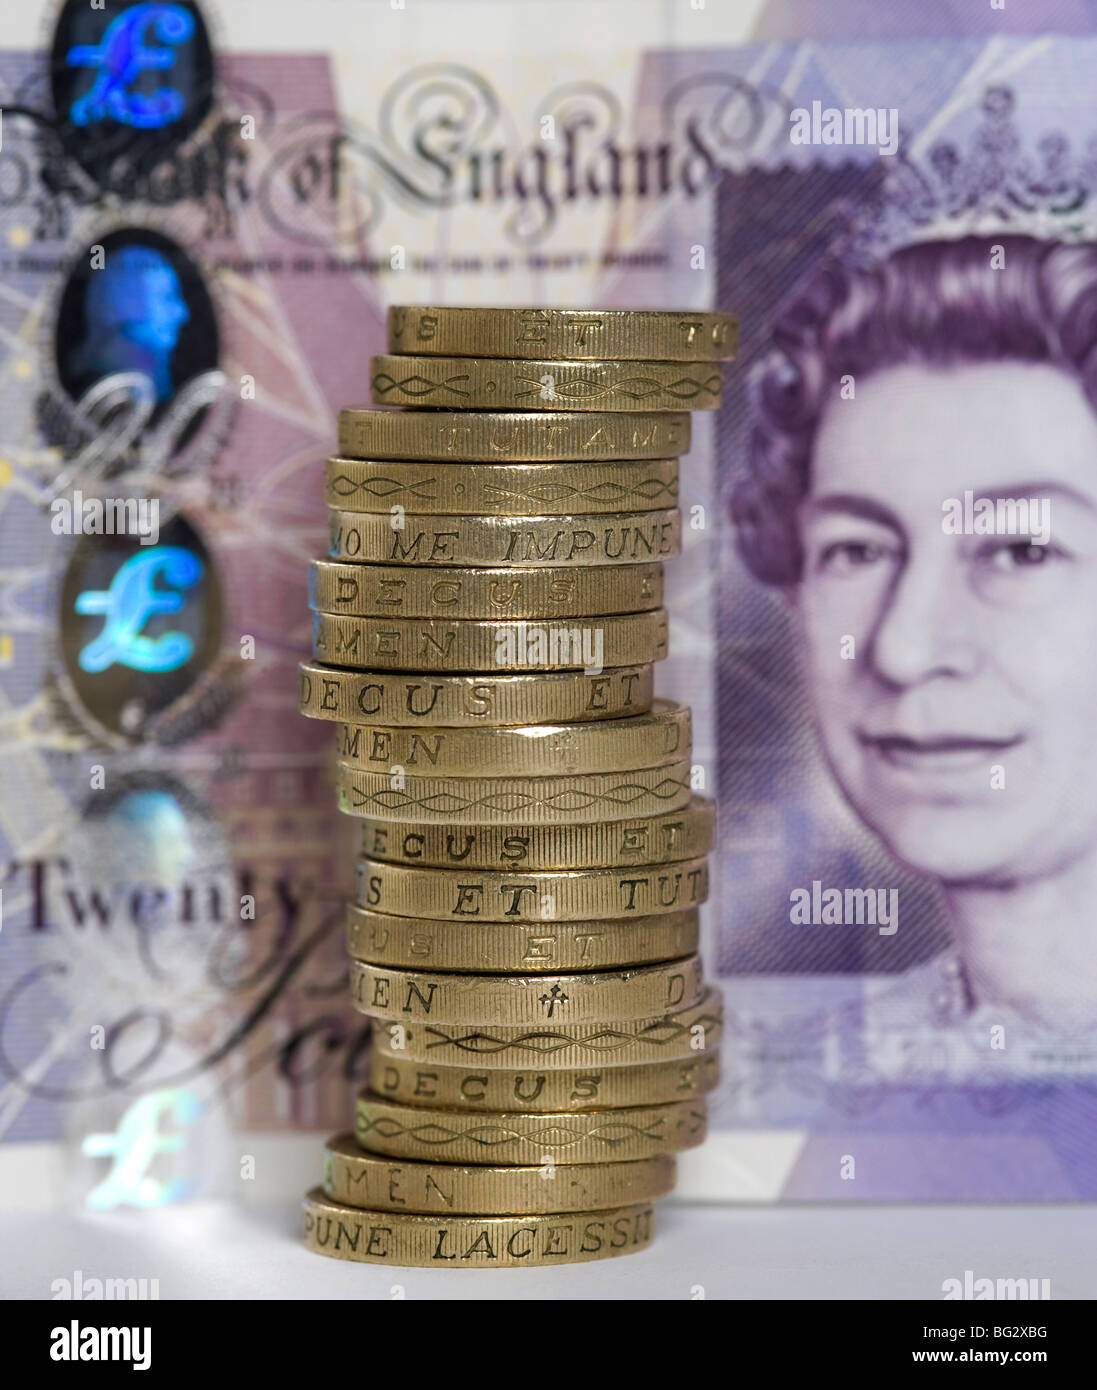 Pounds coins in front of £20 note Stock Photo